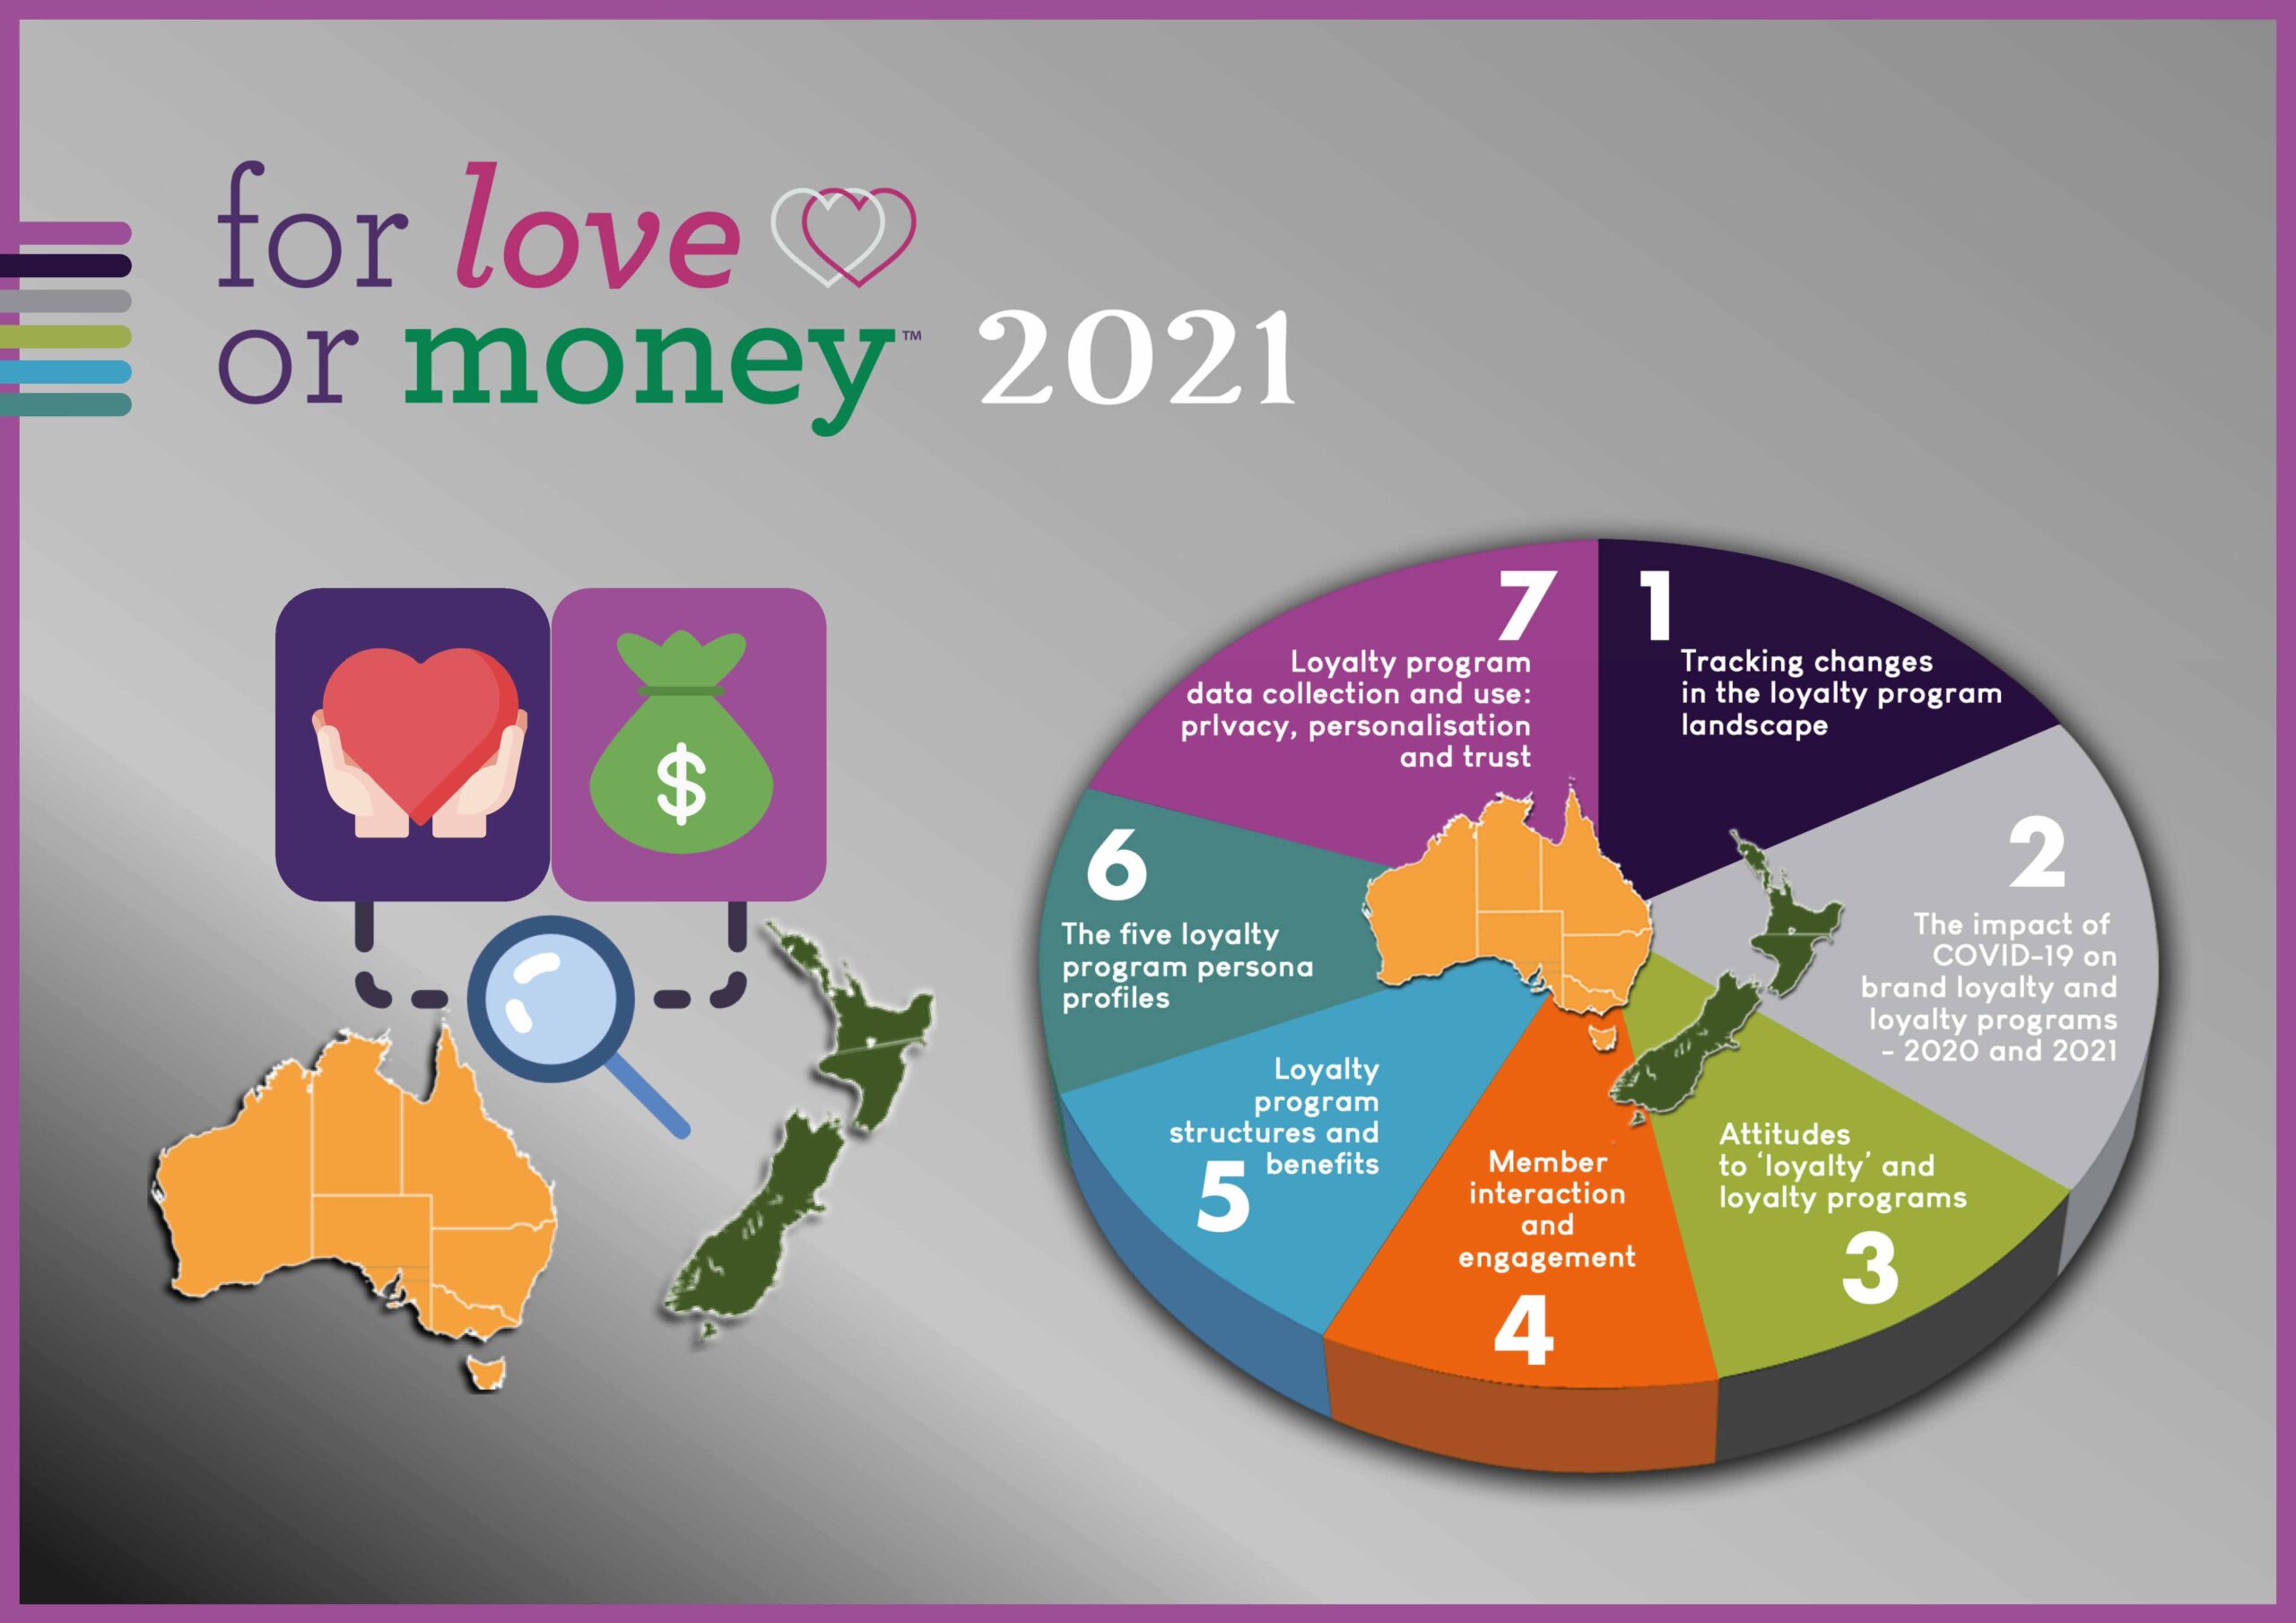 Loyalty program research - For Love or Money™ 2021 -